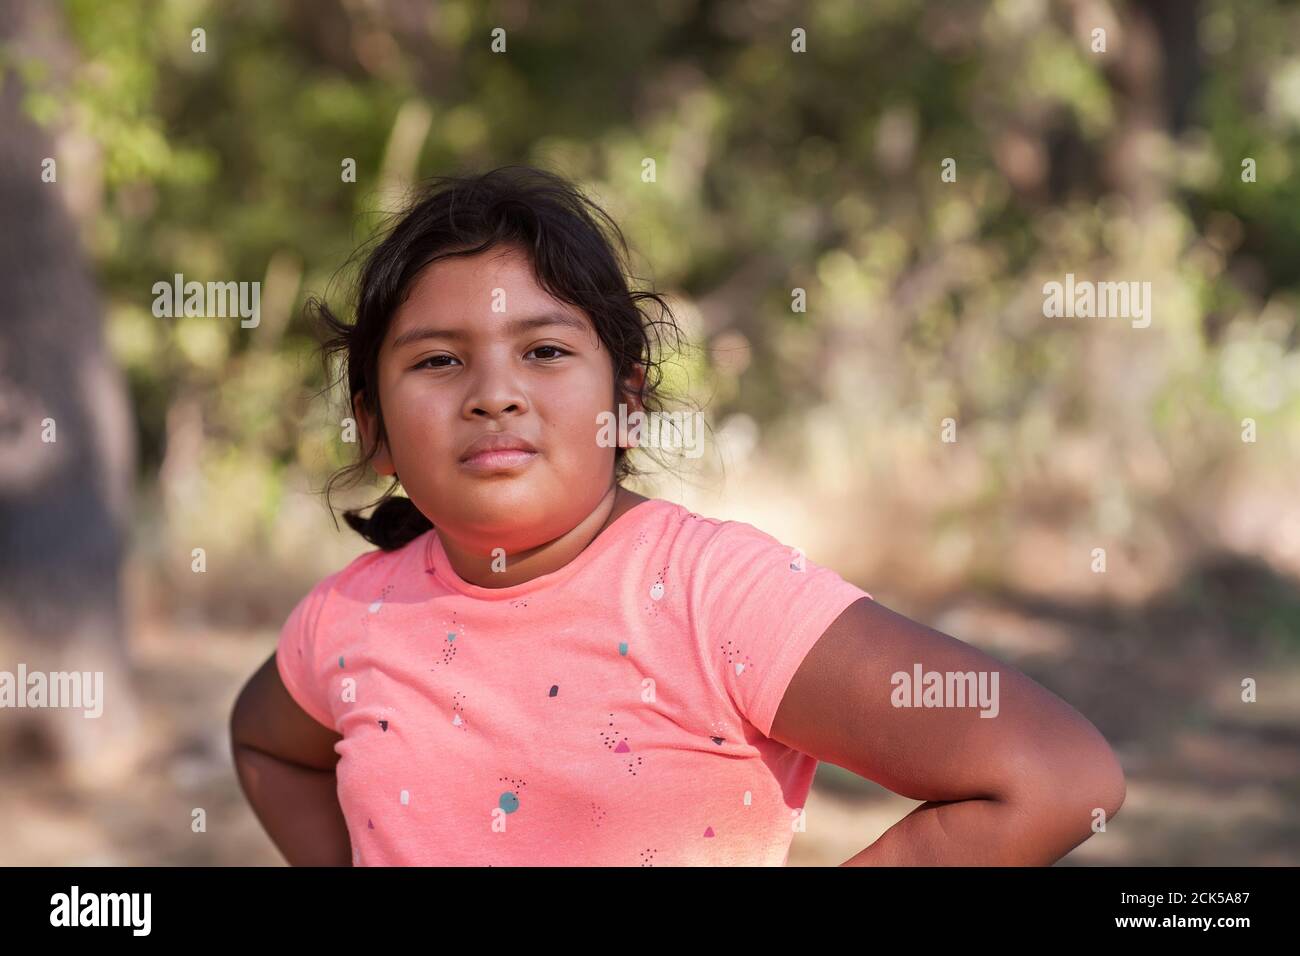 A young Latino girl with arms resting on her hips and expressing an aggressive attitude, hostile or intimidating. Stock Photo